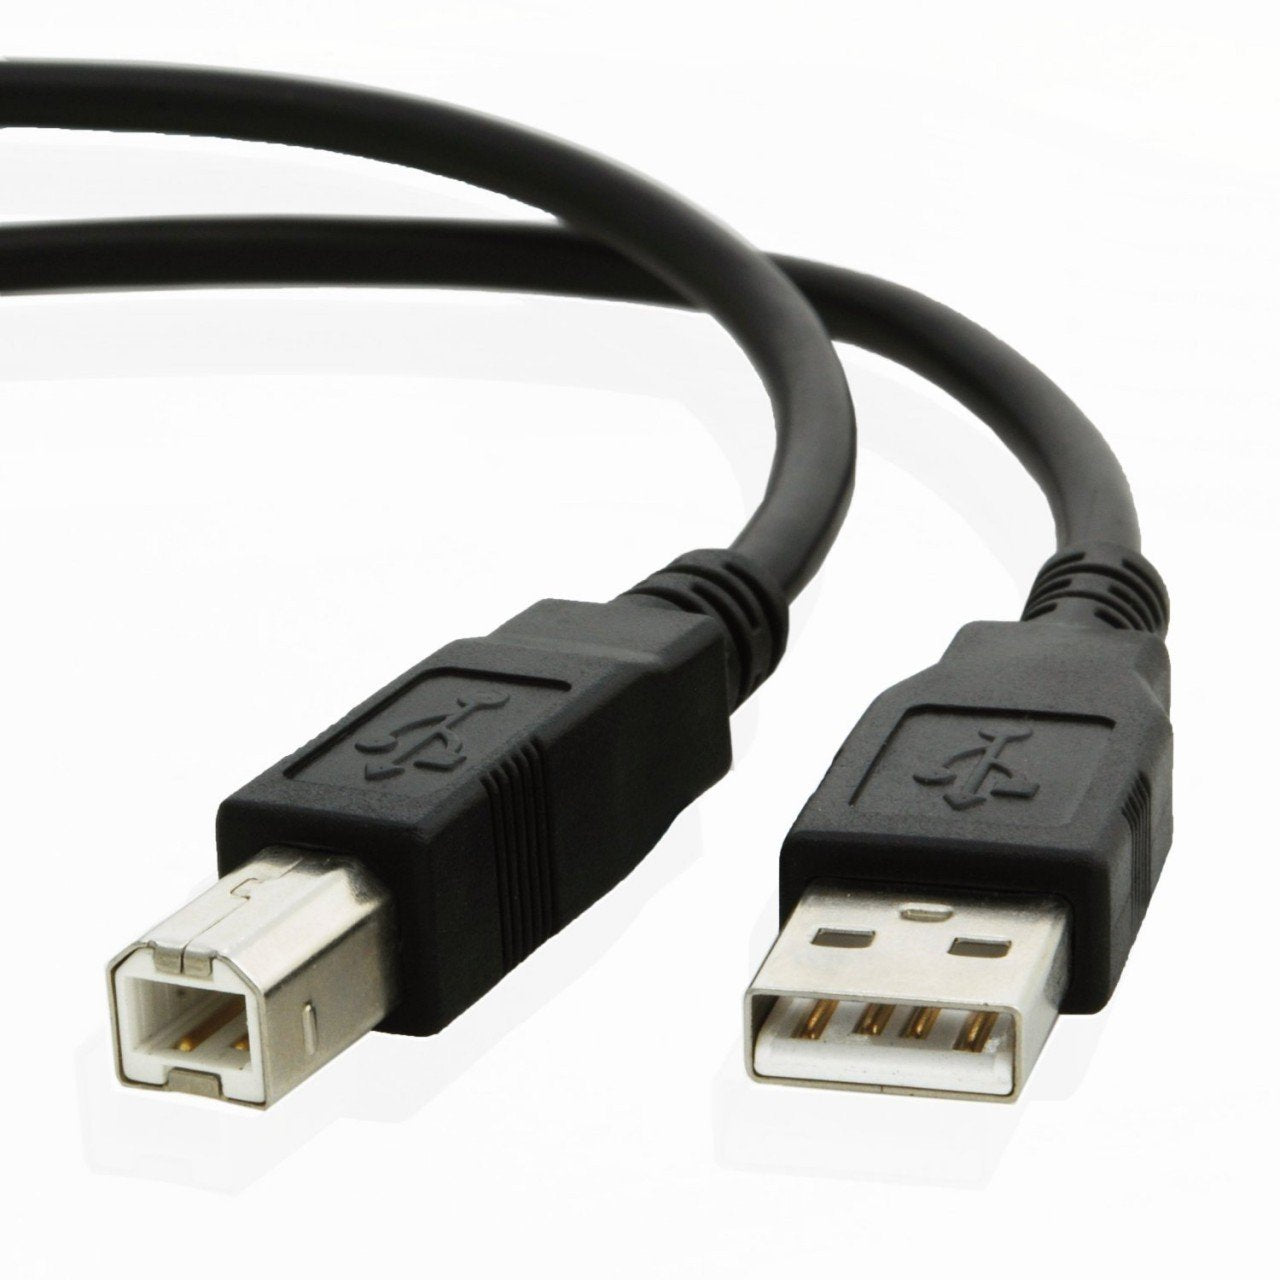 USB cable for Dell C1760nw